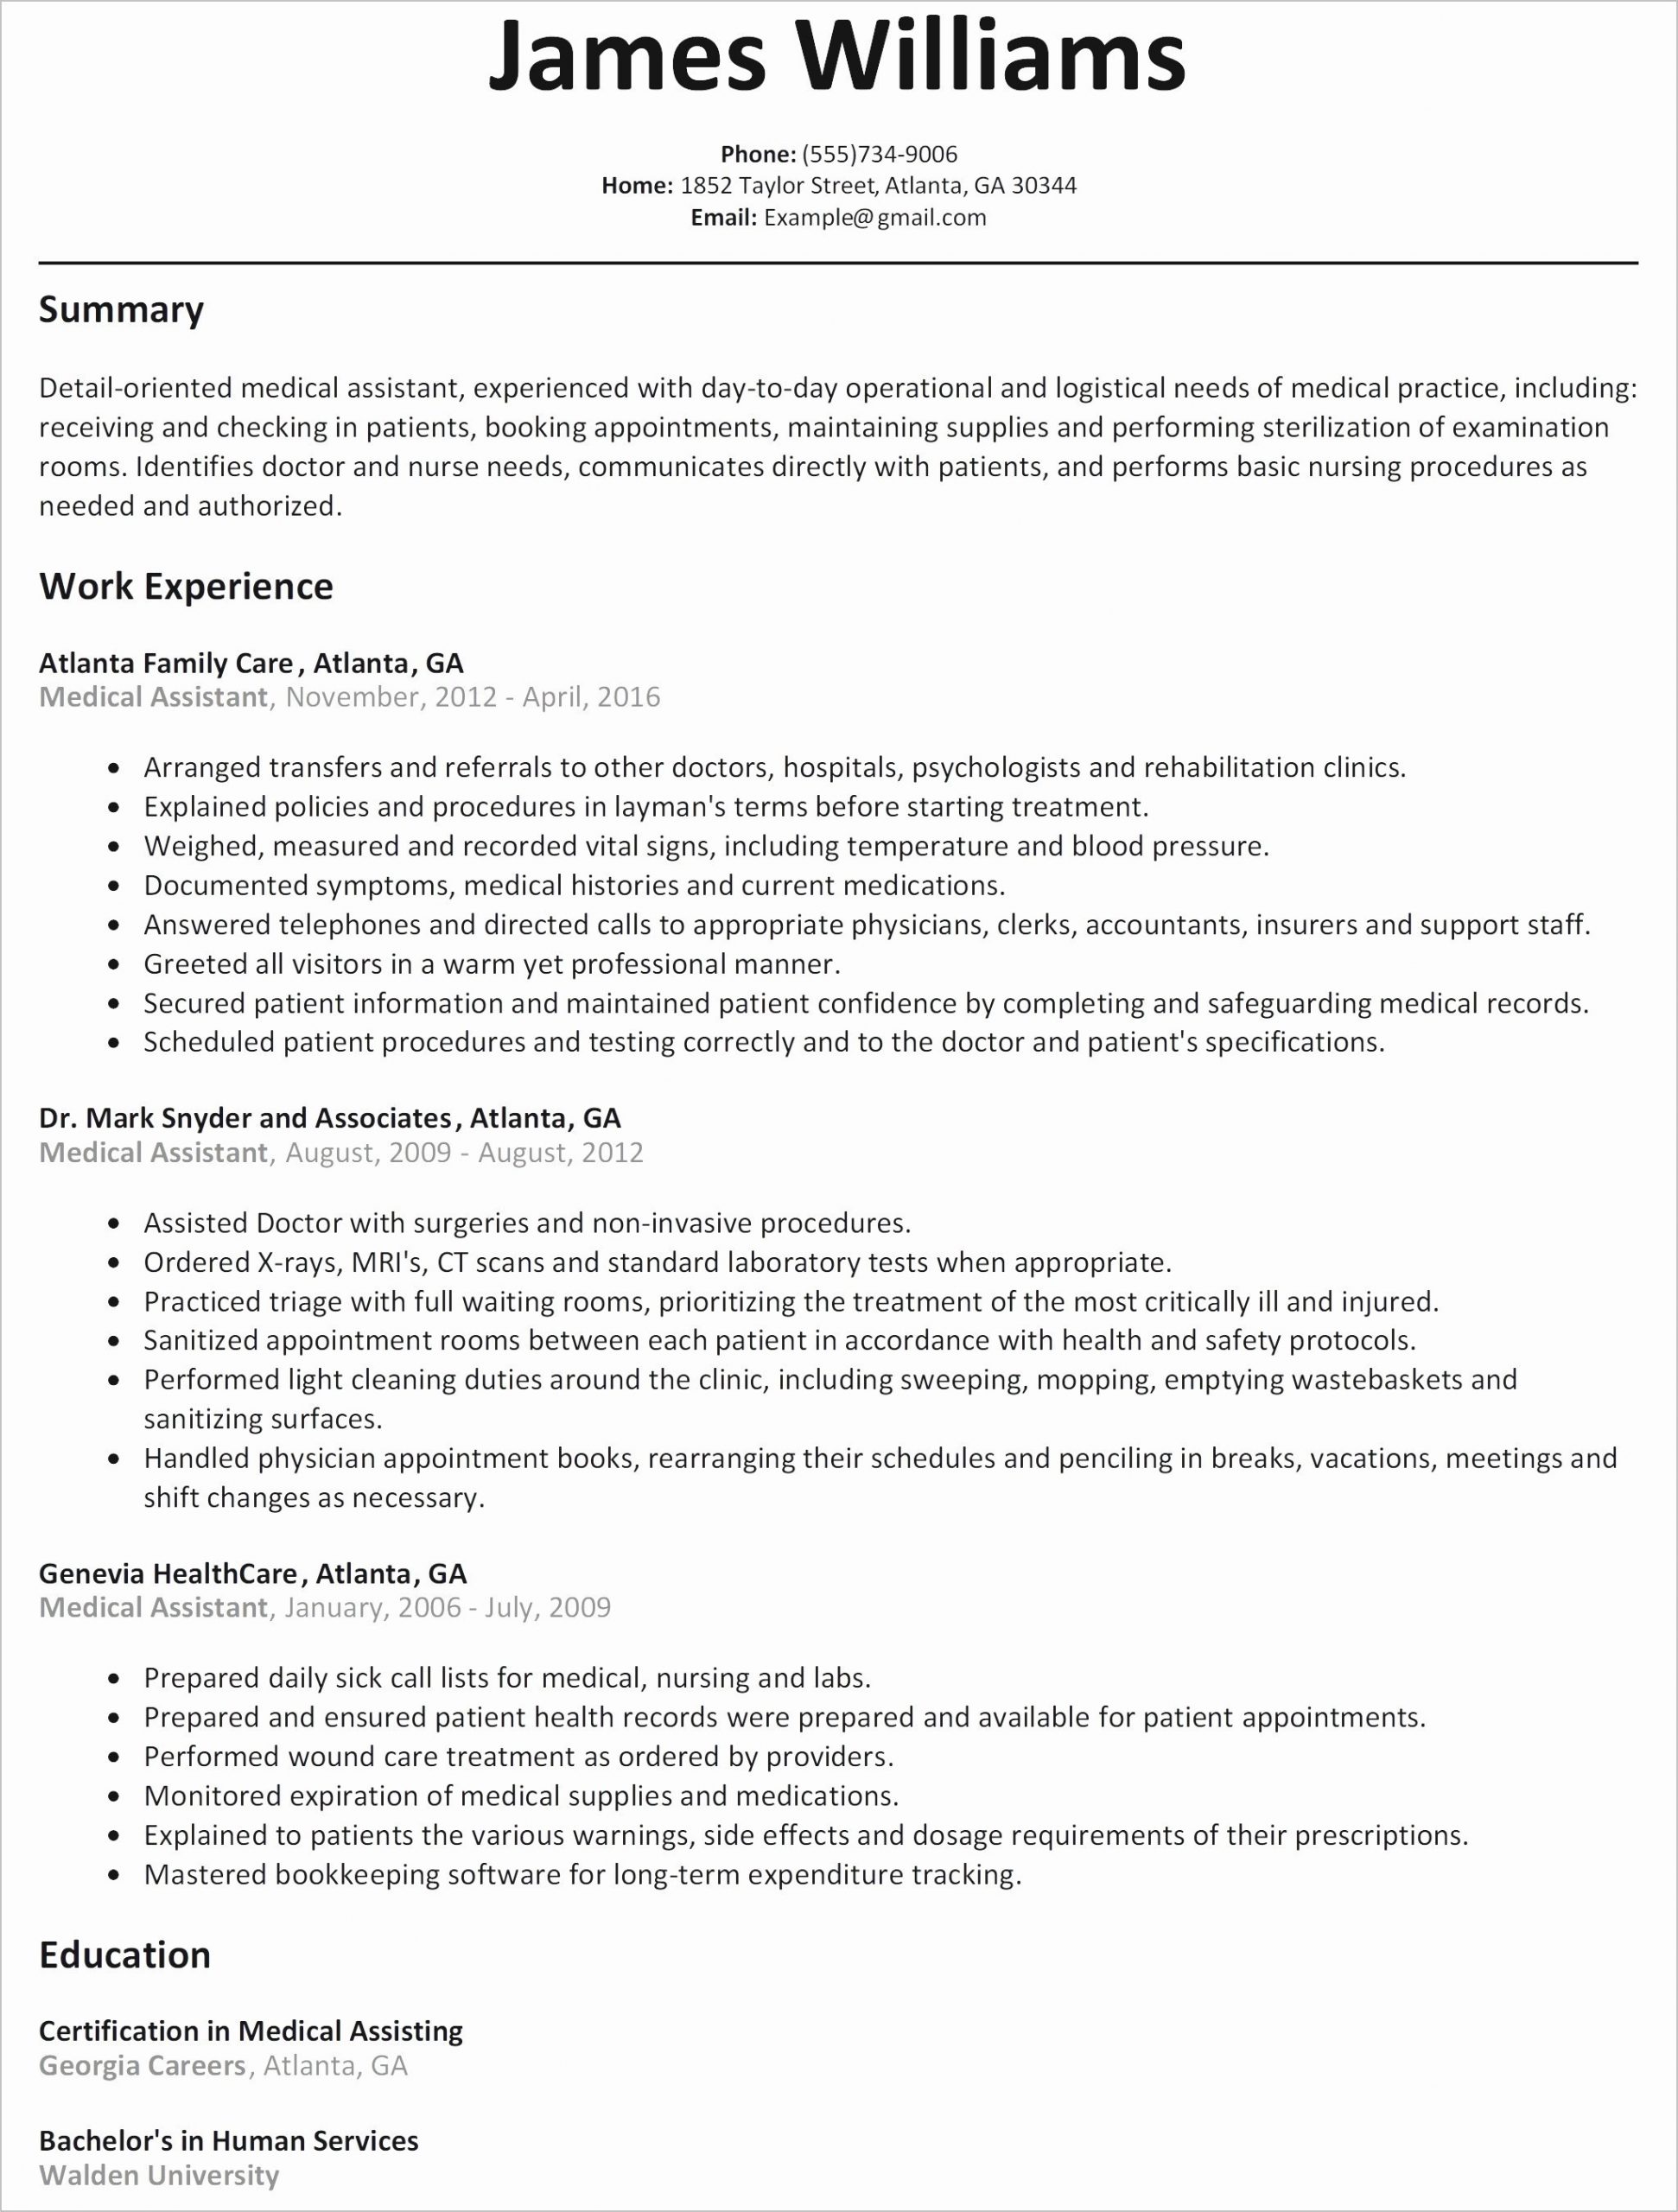 Sample Resume for Shipping and Receiving Worker Shipping Clerk Resume October 2021